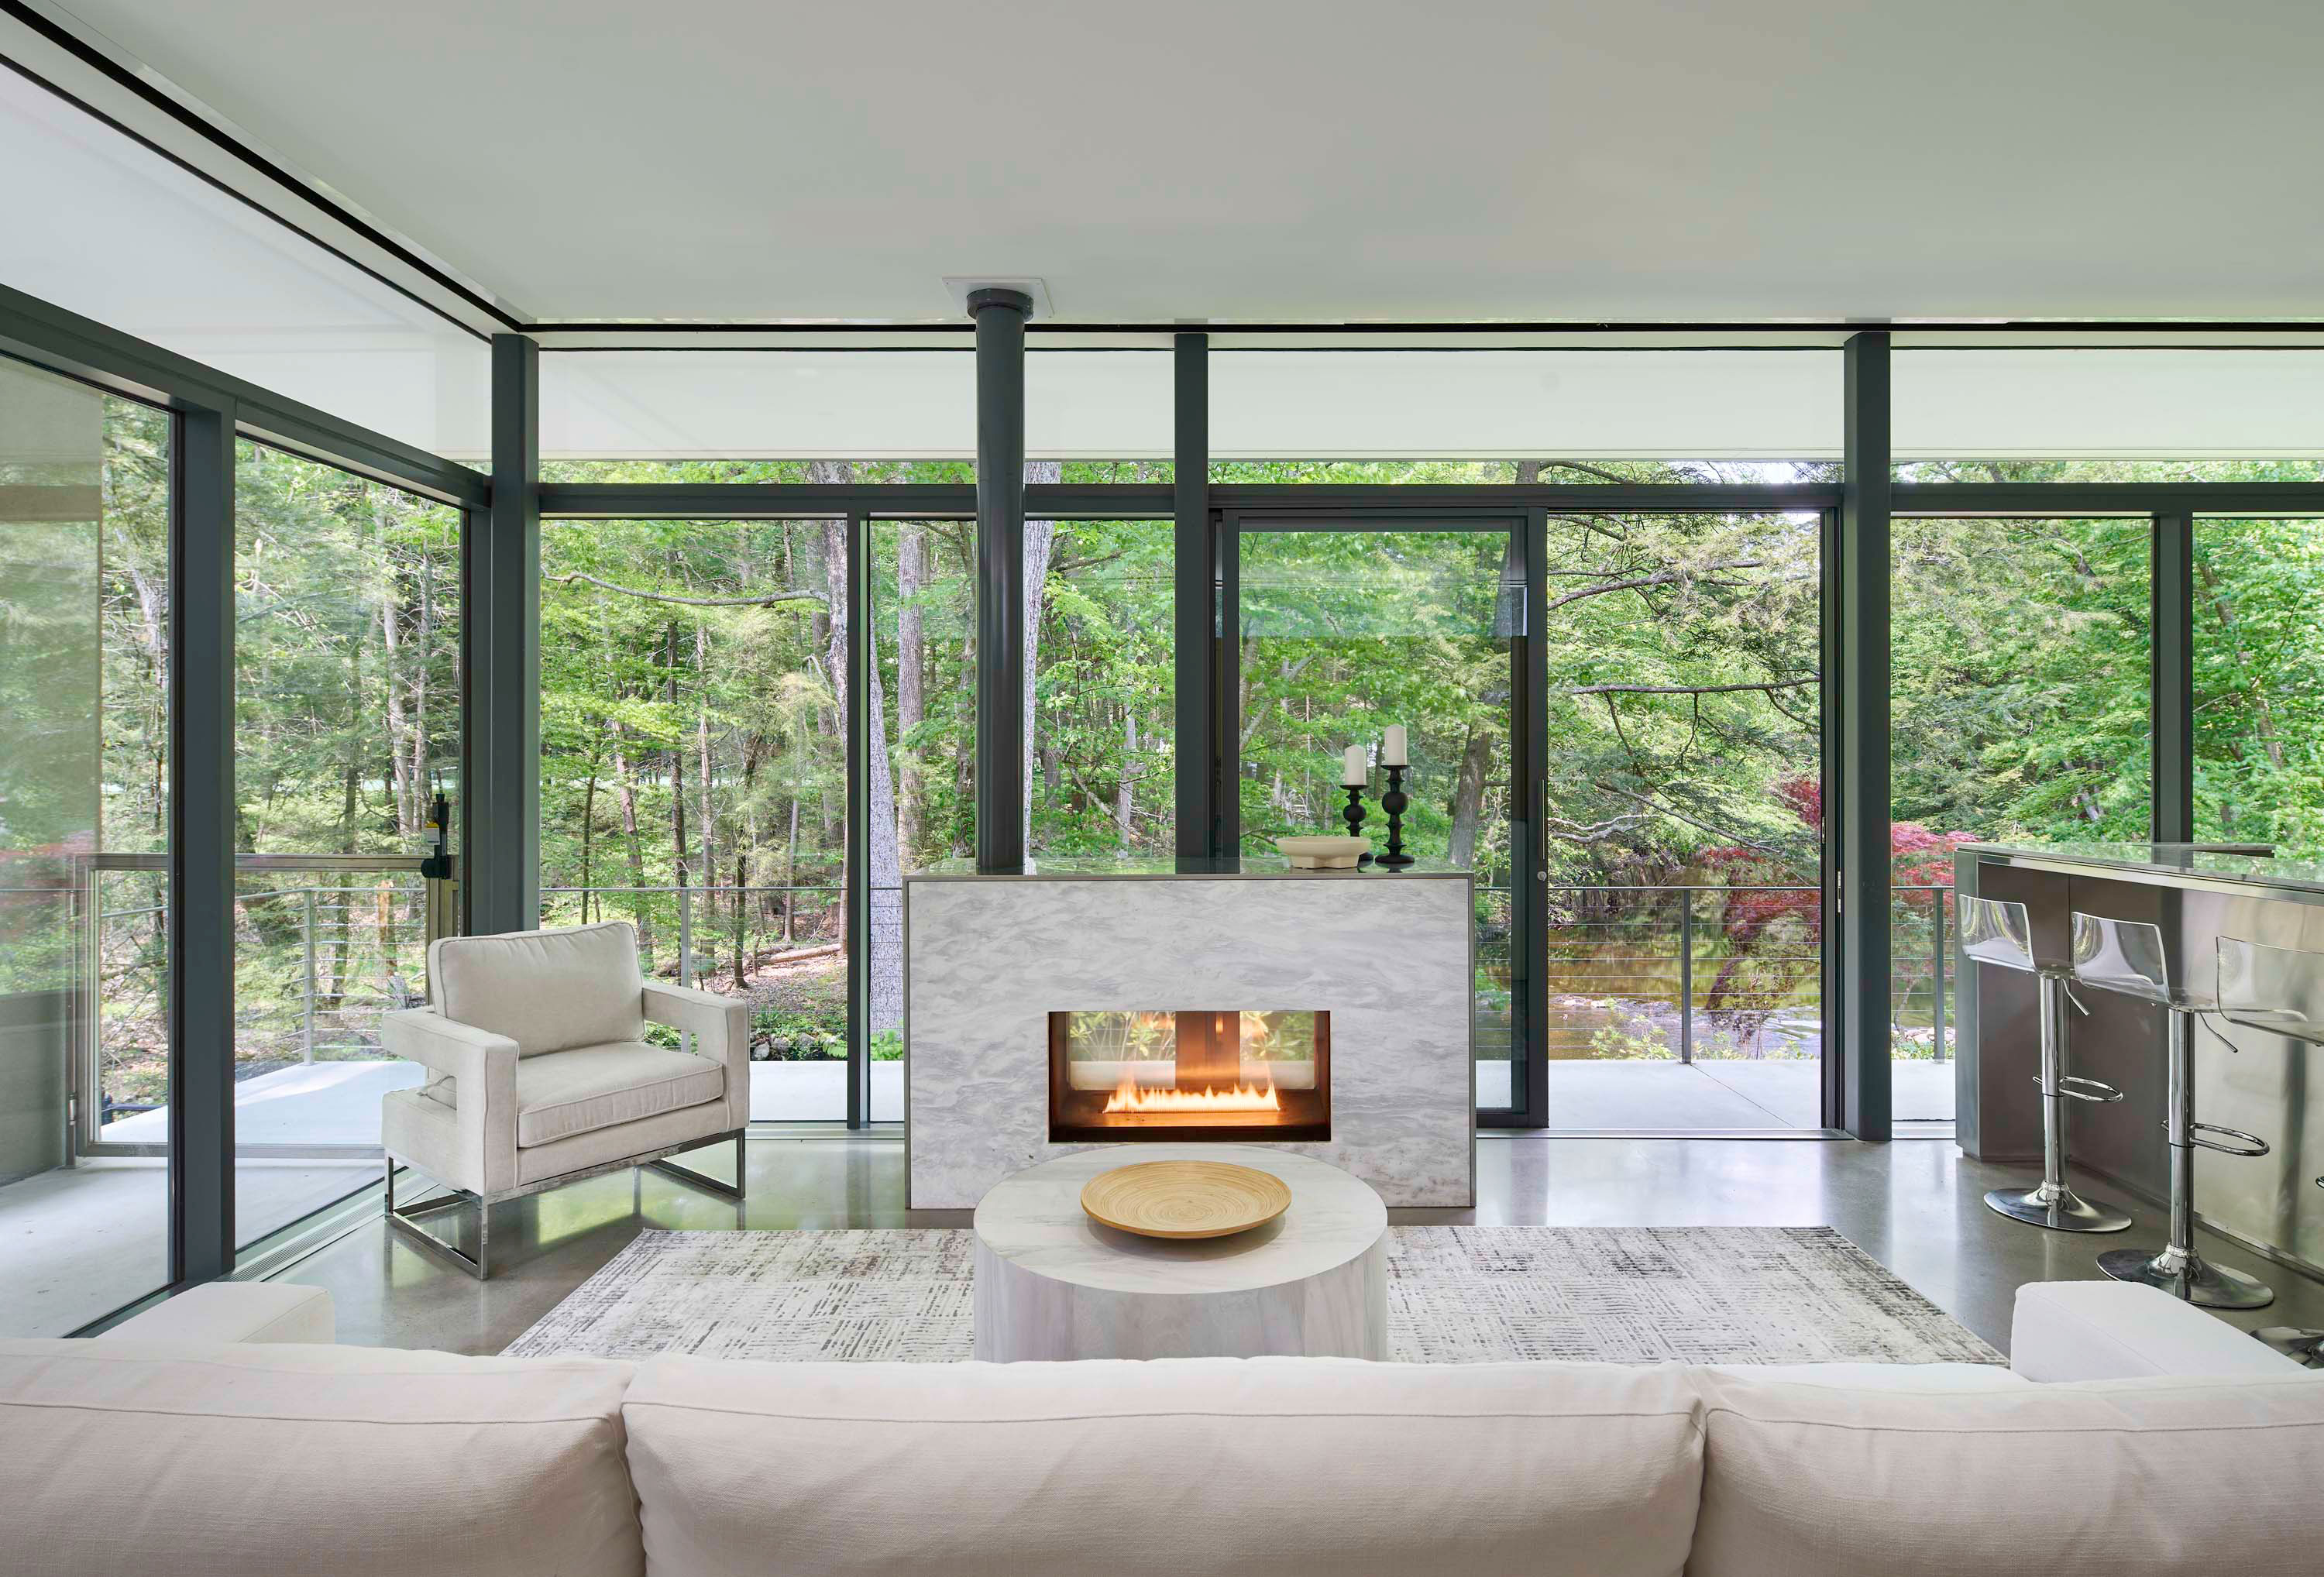 Interior photo of Weston Residence by Specht Novak Architects. Shot by Jasper Lazor, featuring a living space, fireplace, and glass surfaces that with a view of trees around the home.